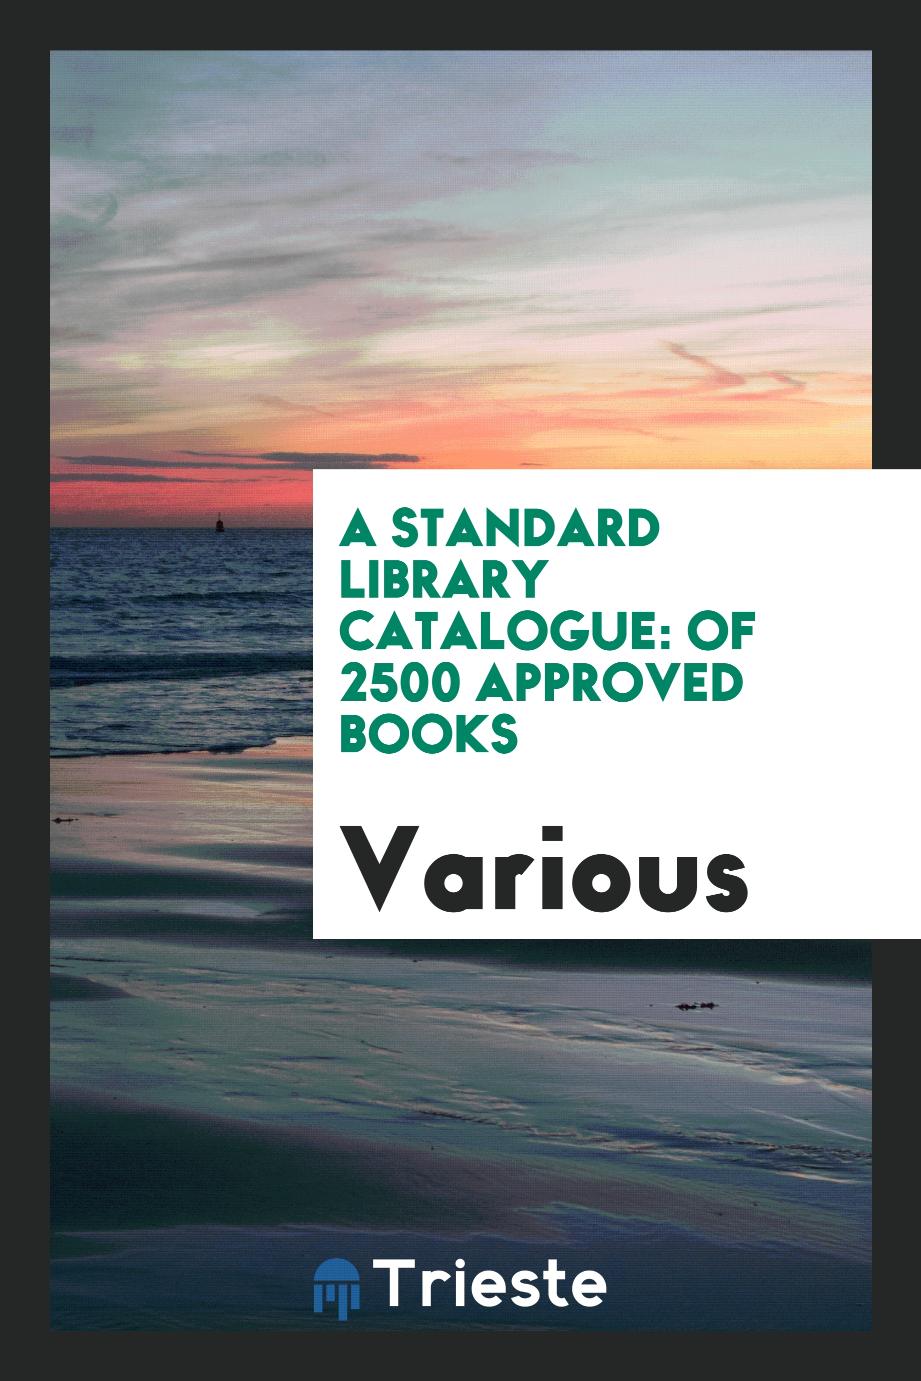 A Standard Library Catalogue: Of 2500 Approved Books